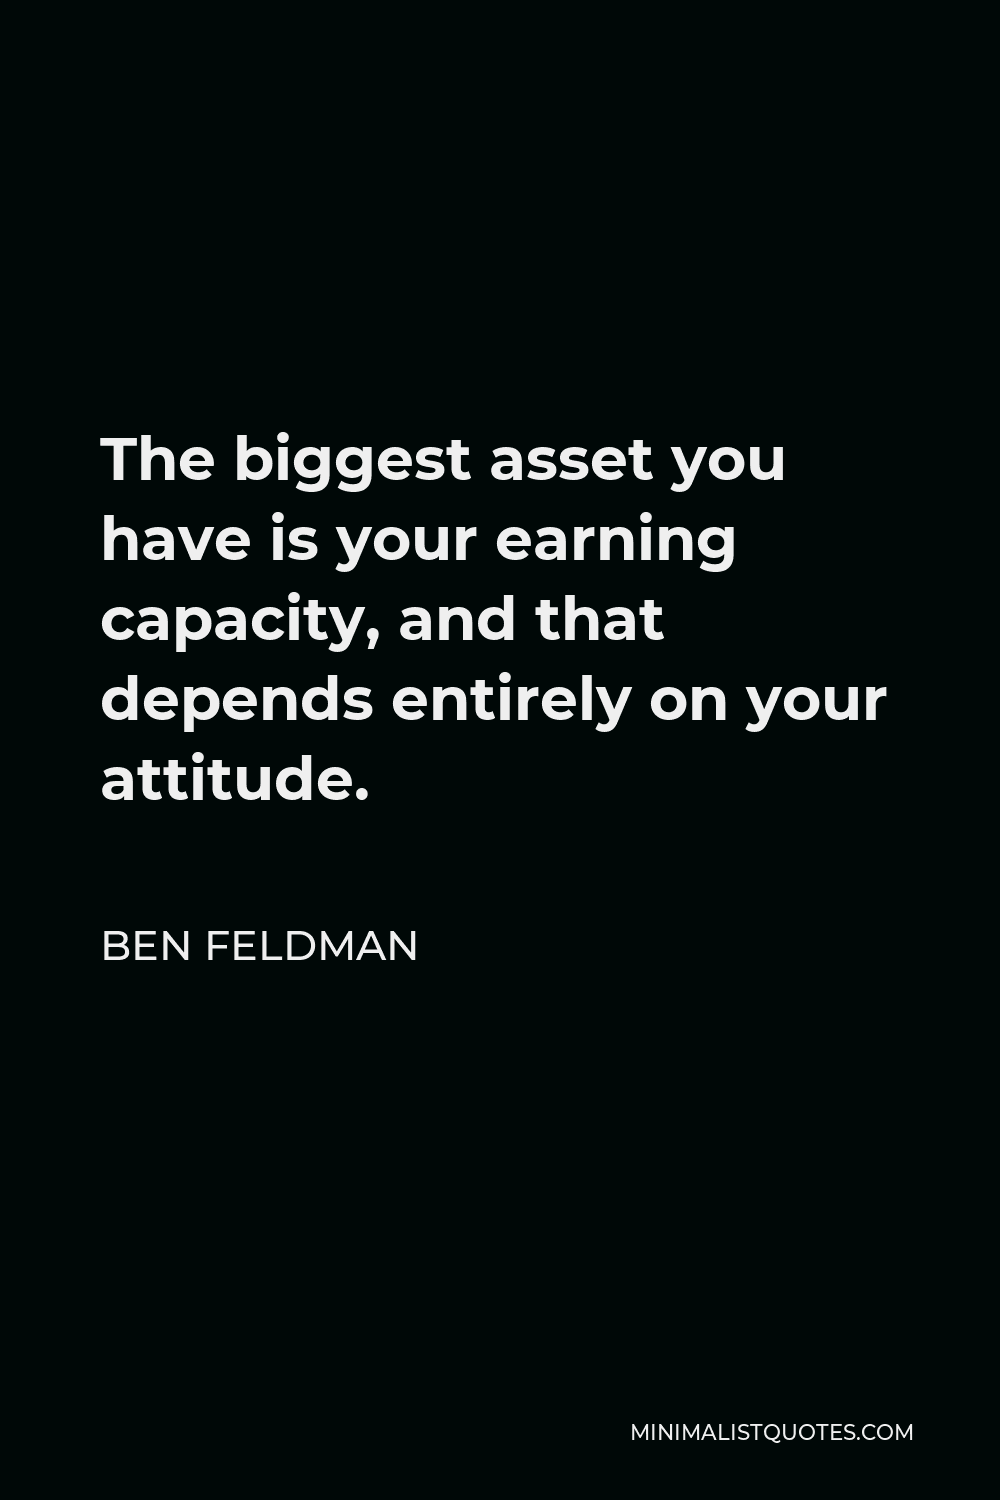 Ben Feldman Quote - The biggest asset you have is your earning capacity, and that depends entirely on your attitude.